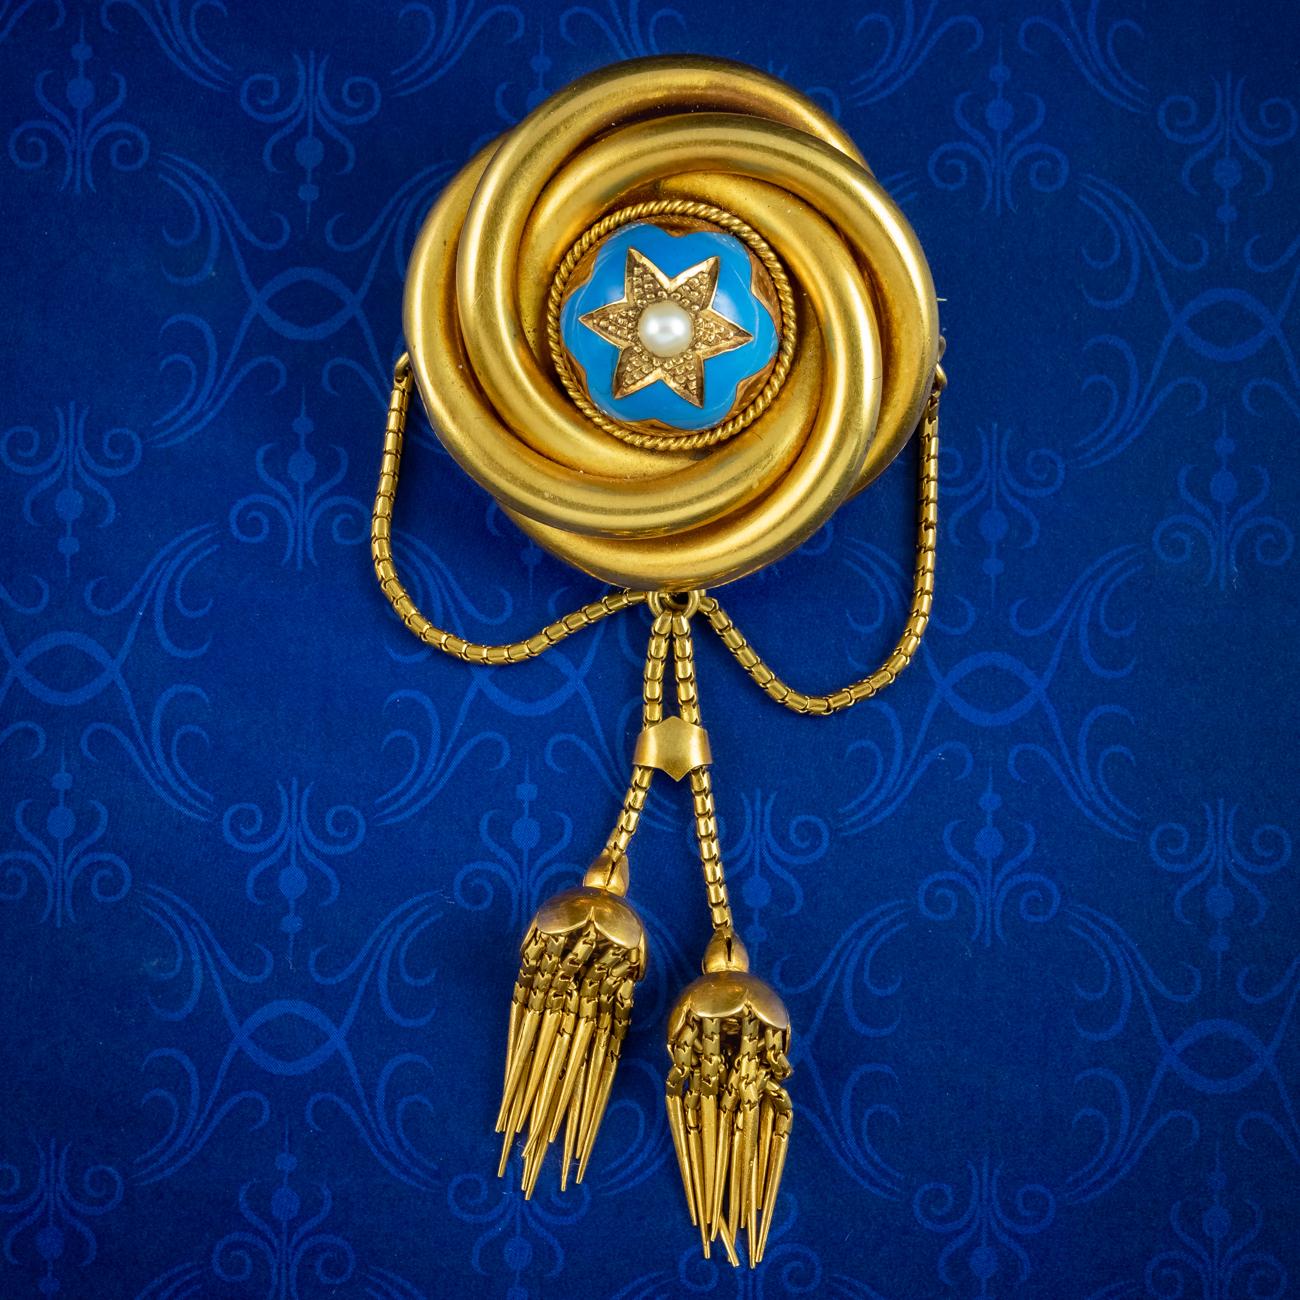 A remarkable antique Victorian Etruscan revival brooch made by established Manchester based jewellers Ollivant & Botsford in the late 19th Century. The piece consists of a large, knot with a domed centre, layered in sky-blue enamel and topped with a